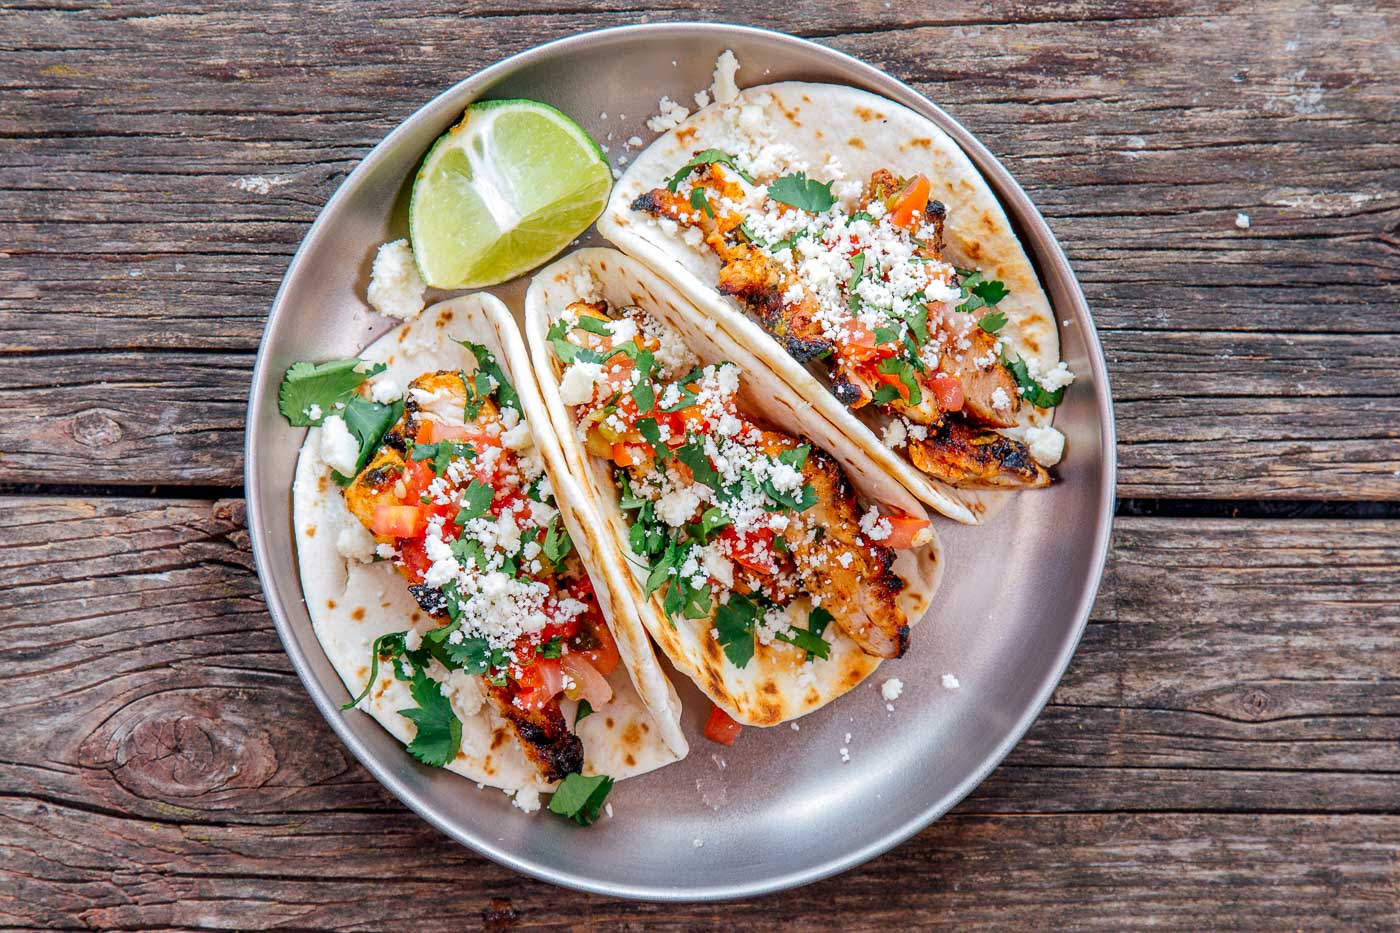 Three grilled chicken tacos on a plate